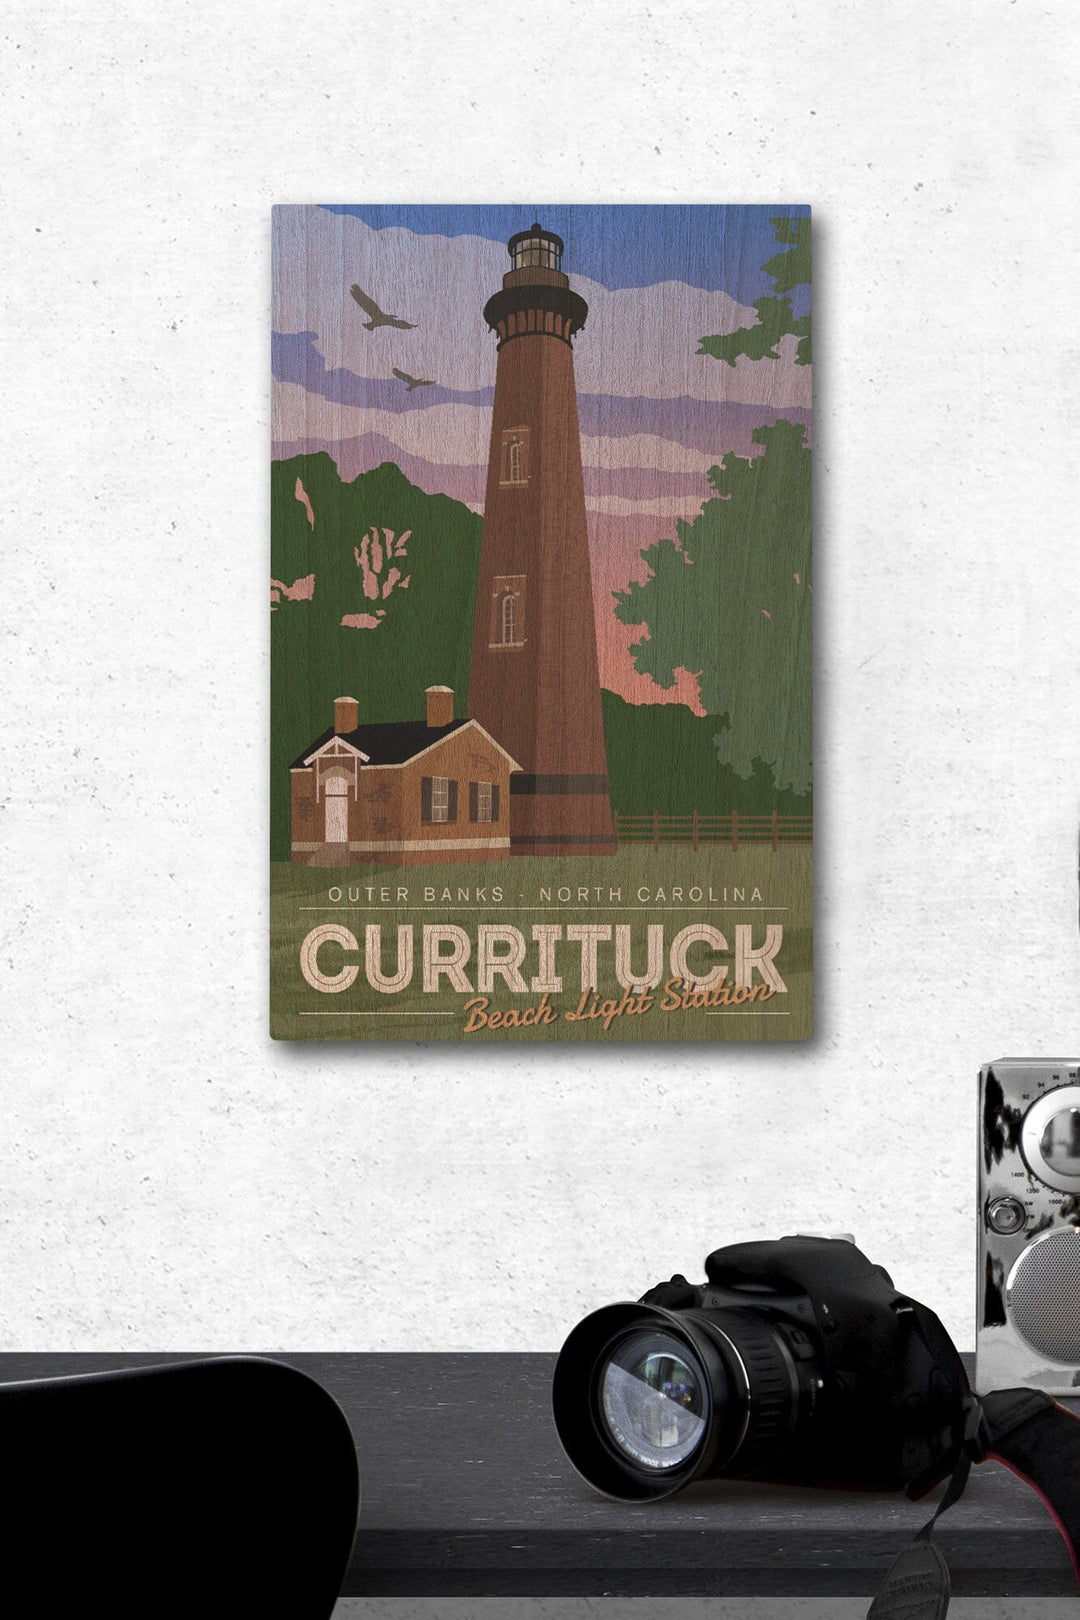 Outer Banks, North Carolina, Currituck Beach Lighthouse, Vector Style, Lantern Press Artwork, Wood Signs and Postcards Wood Lantern Press 12 x 18 Wood Gallery Print 